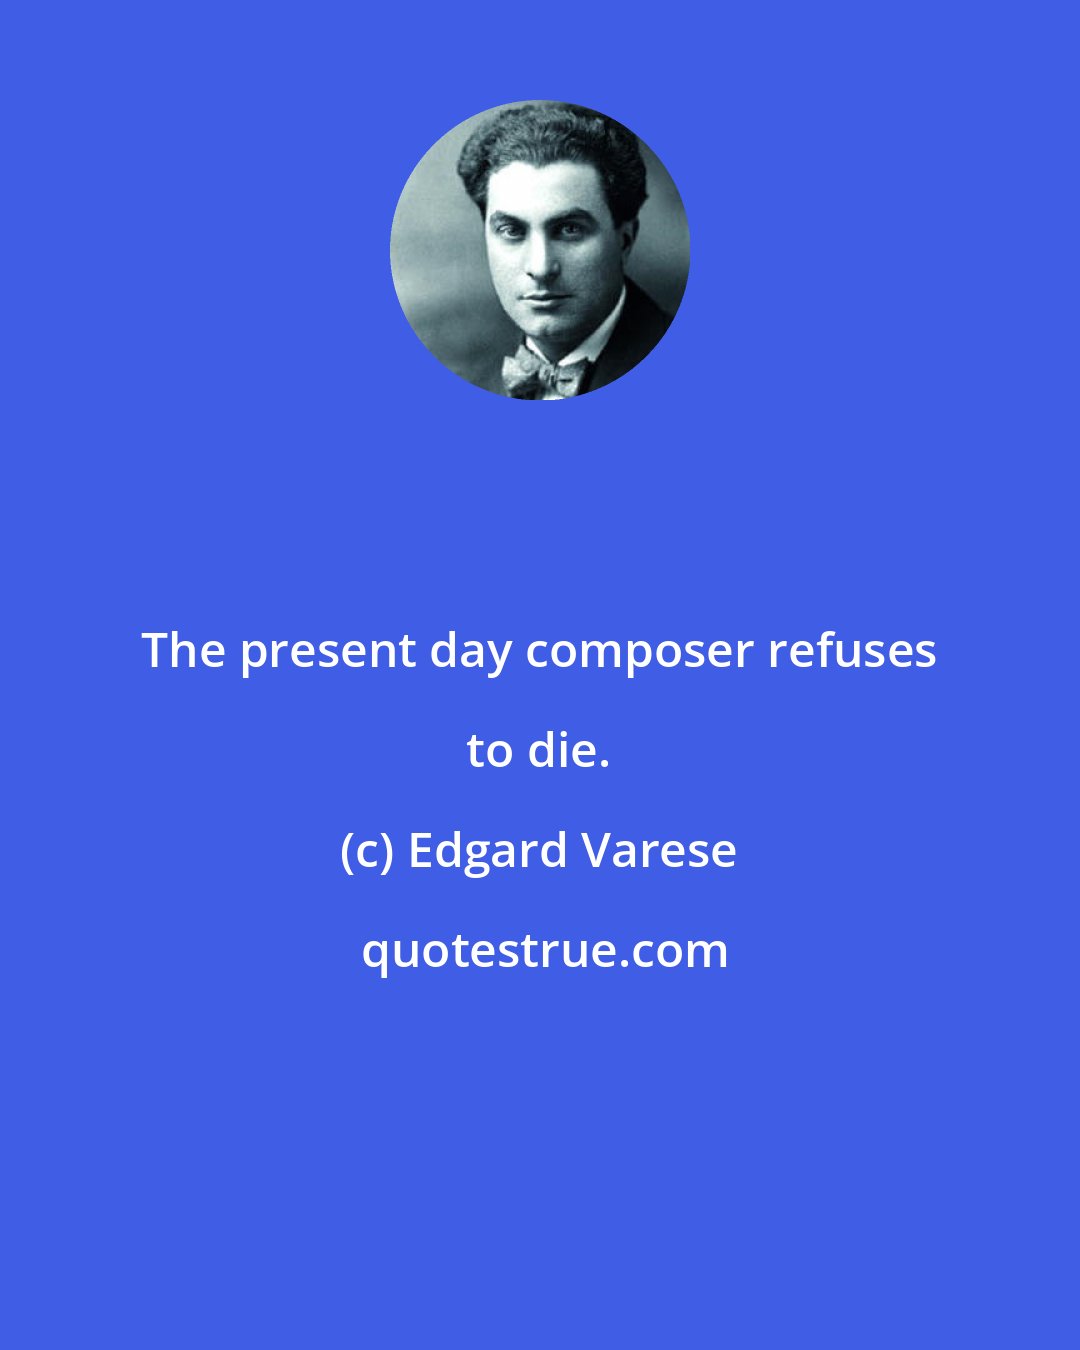 Edgard Varese: The present day composer refuses to die.